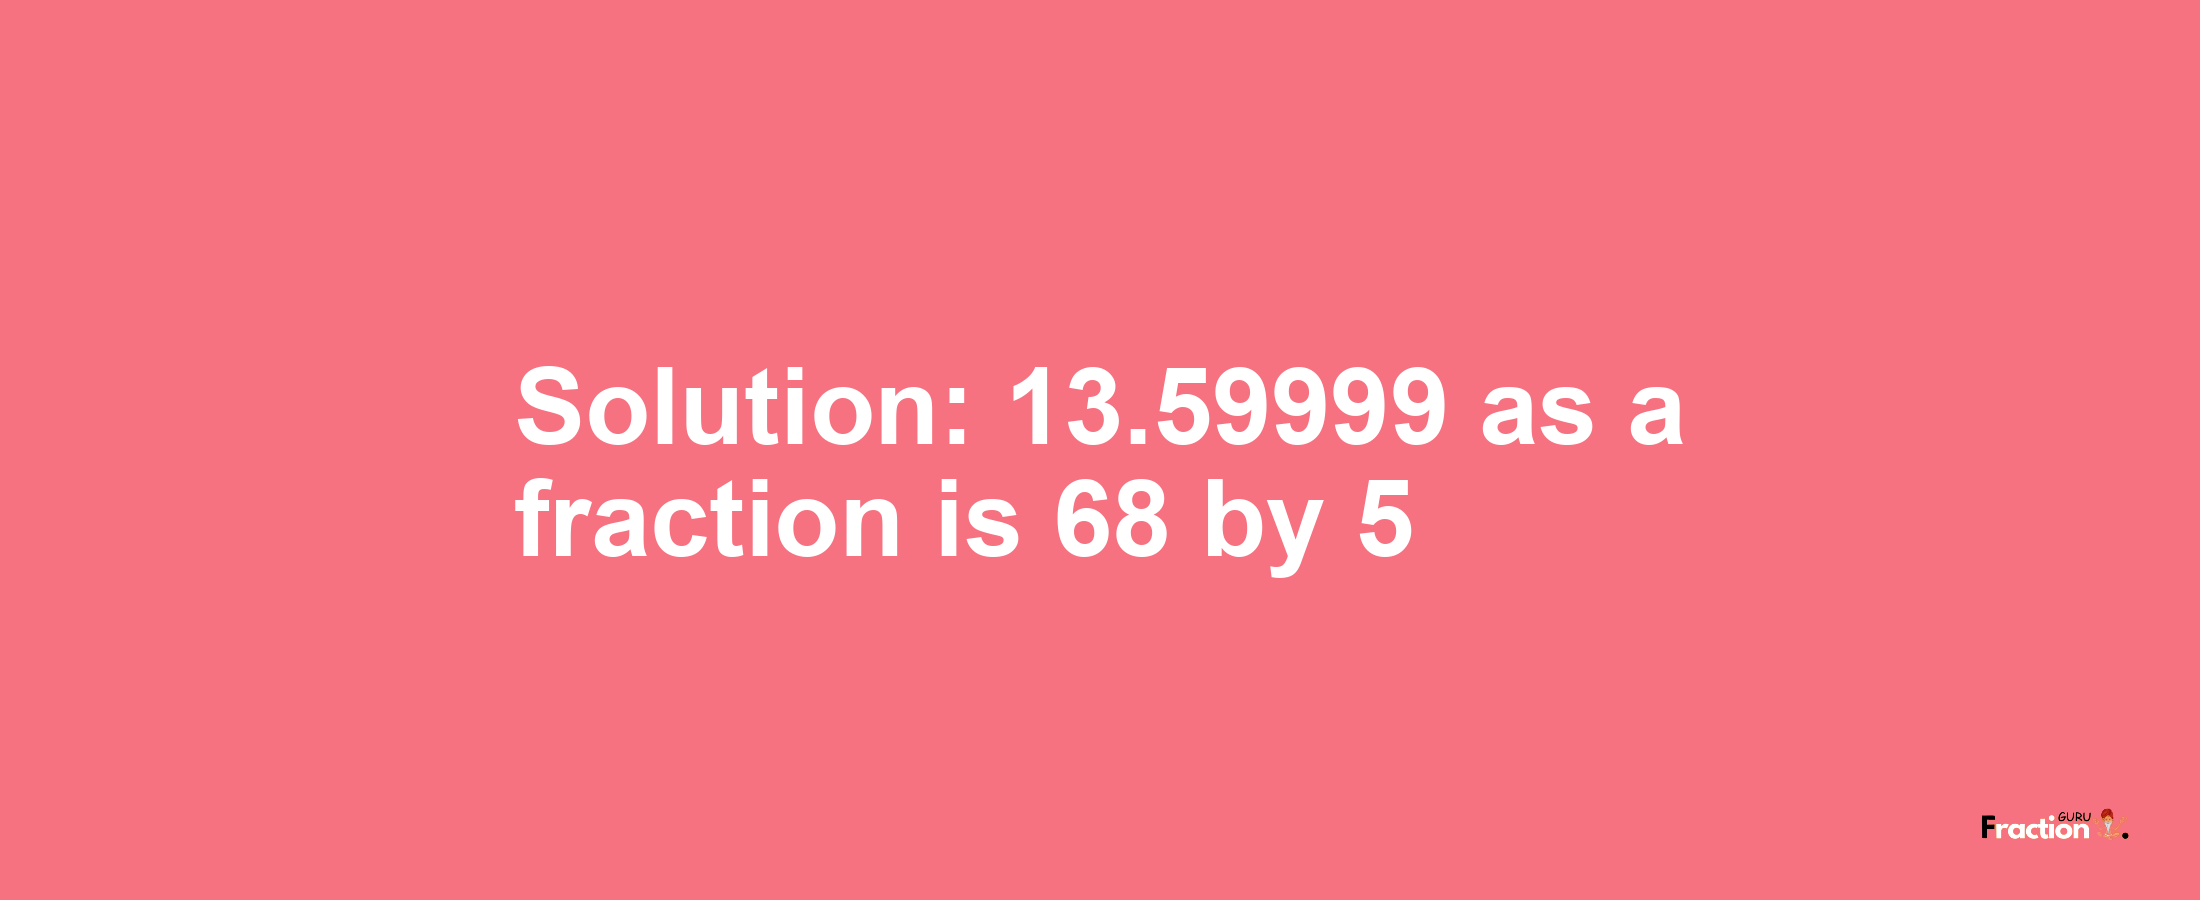 Solution:13.59999 as a fraction is 68/5